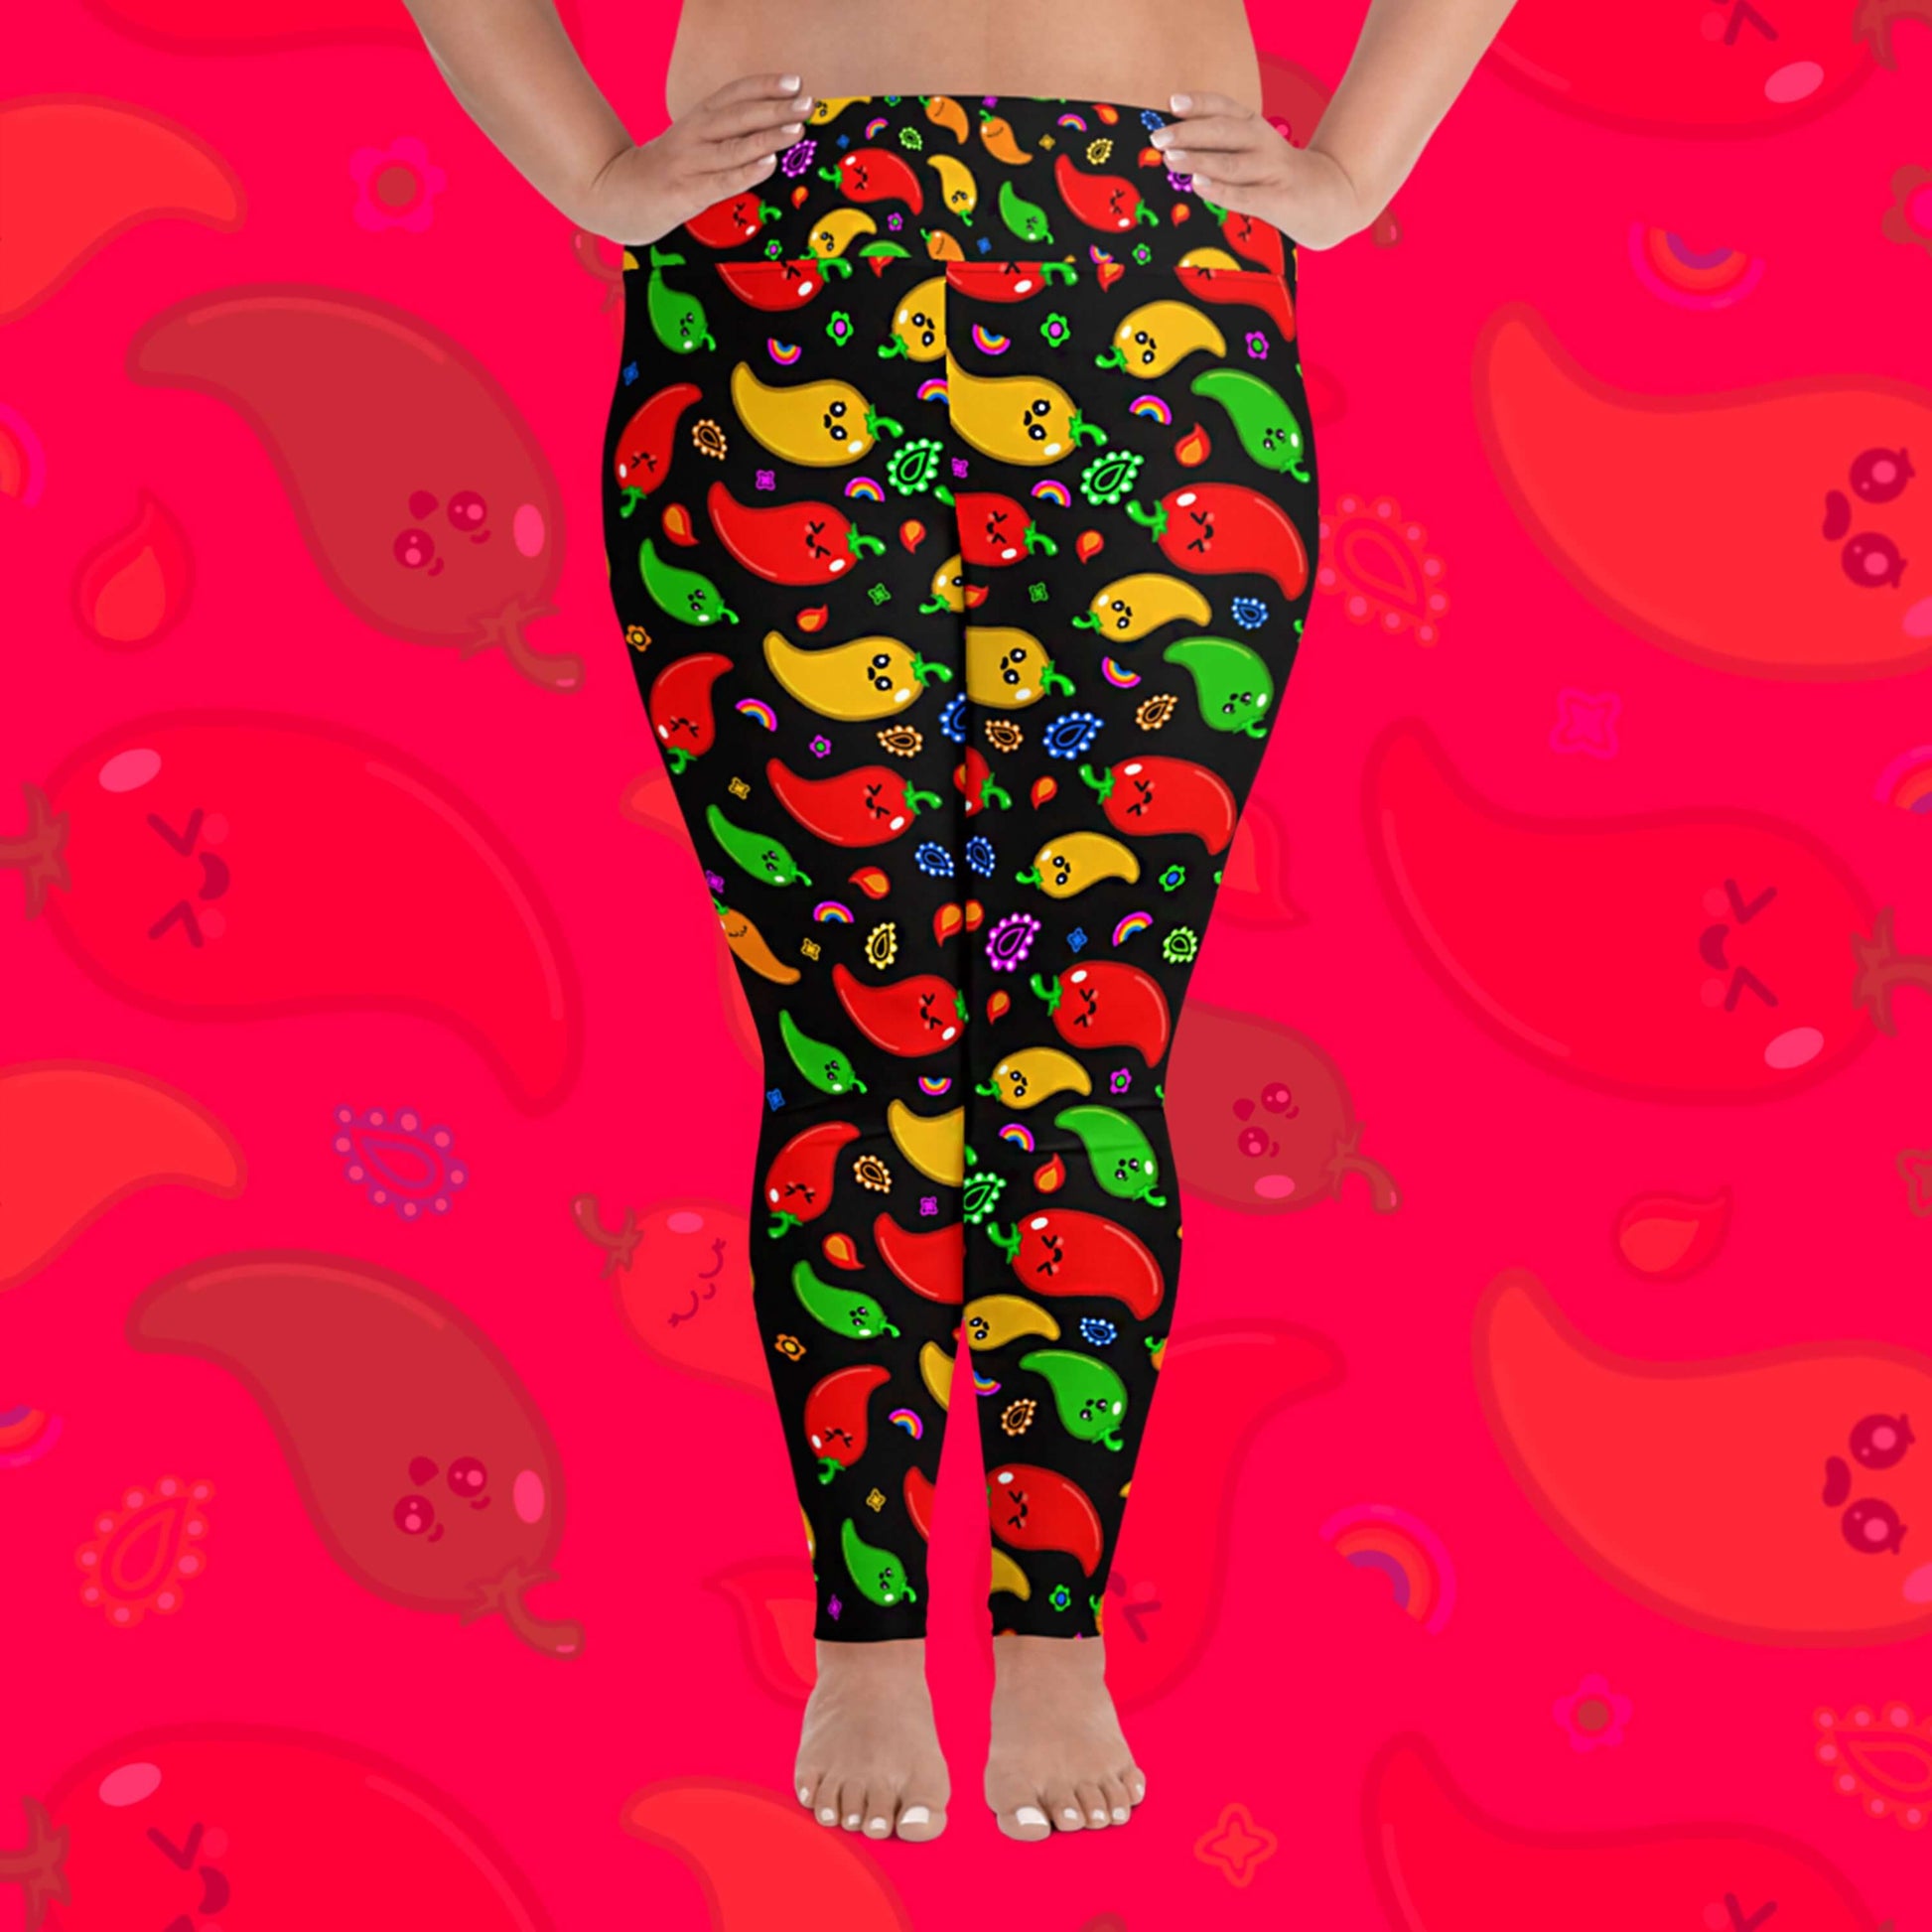 Black leggings with red, green, orange and yellow chilli peppers with cute faces on and various cute doodles around them shown on a model's legs. The background of the photo is a faded close up of the print. The hand drawn design is raising awareness for neurodiversity.